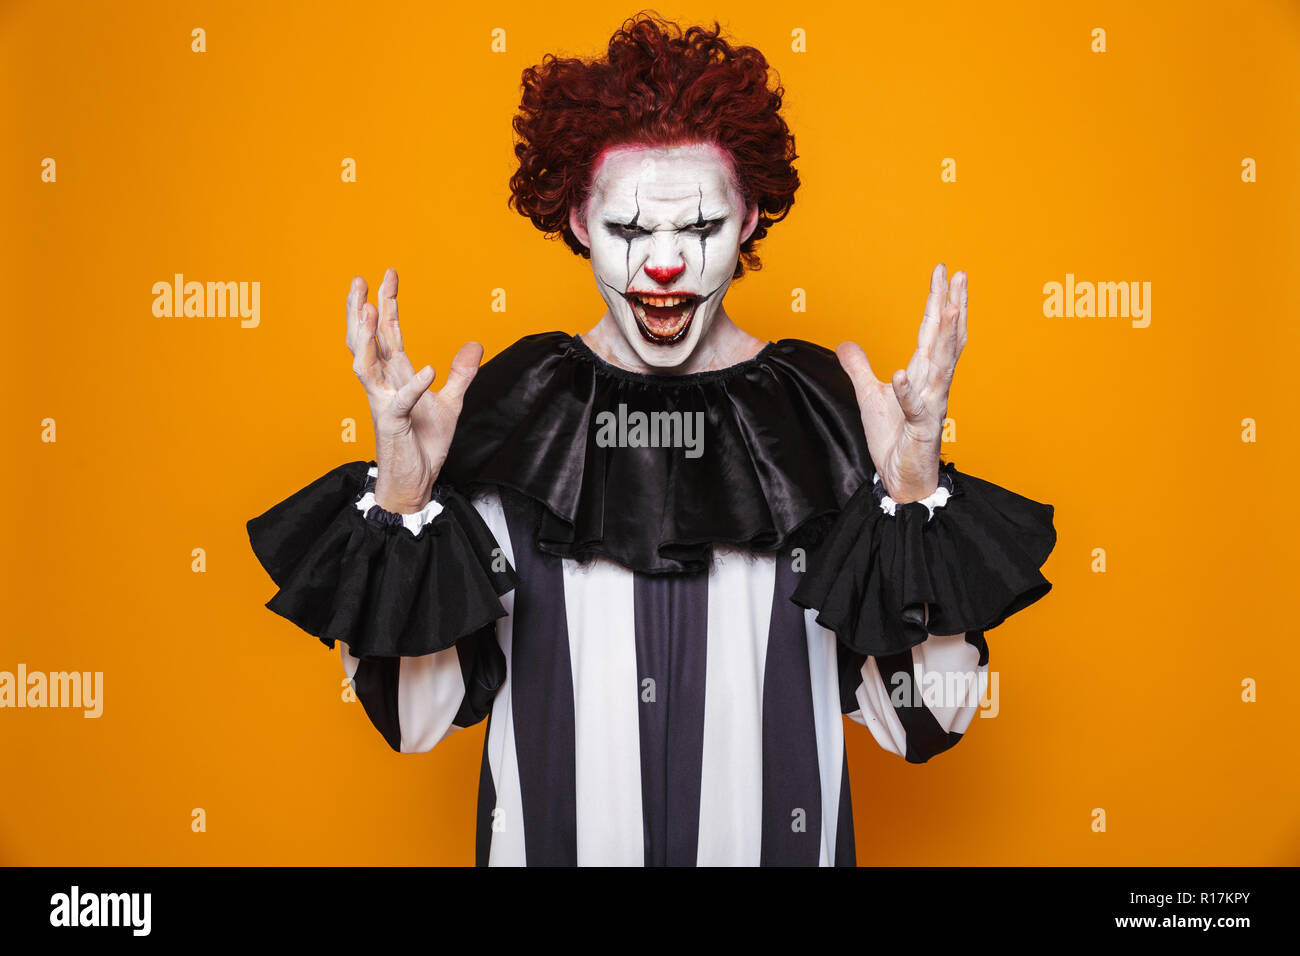 Ugly clown man 20s wearing black costume and halloween makeup looking at camera isolated over yellow background Stock Photo